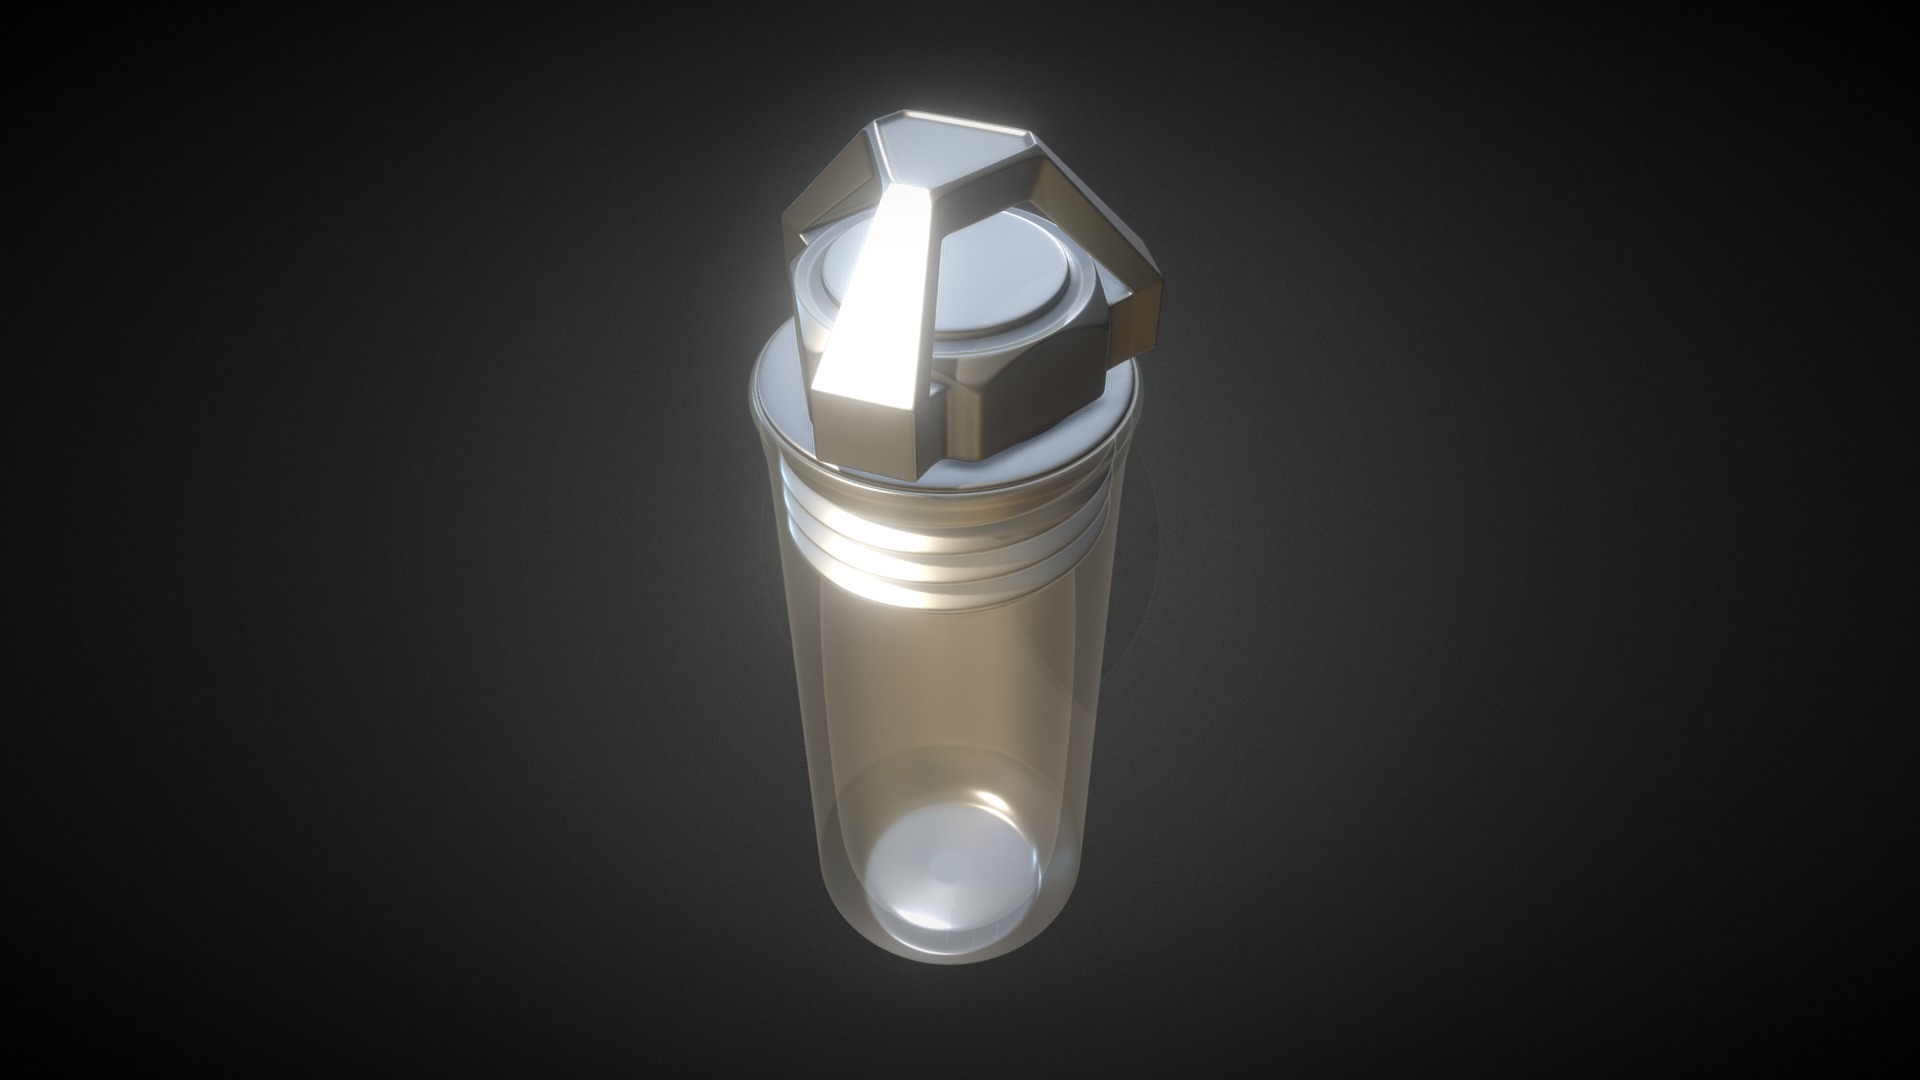 3D model Geocaching Capsule Design - This is a 3D model of the Geocaching Capsule Design. The 3D model is about a light bulb with a black background.